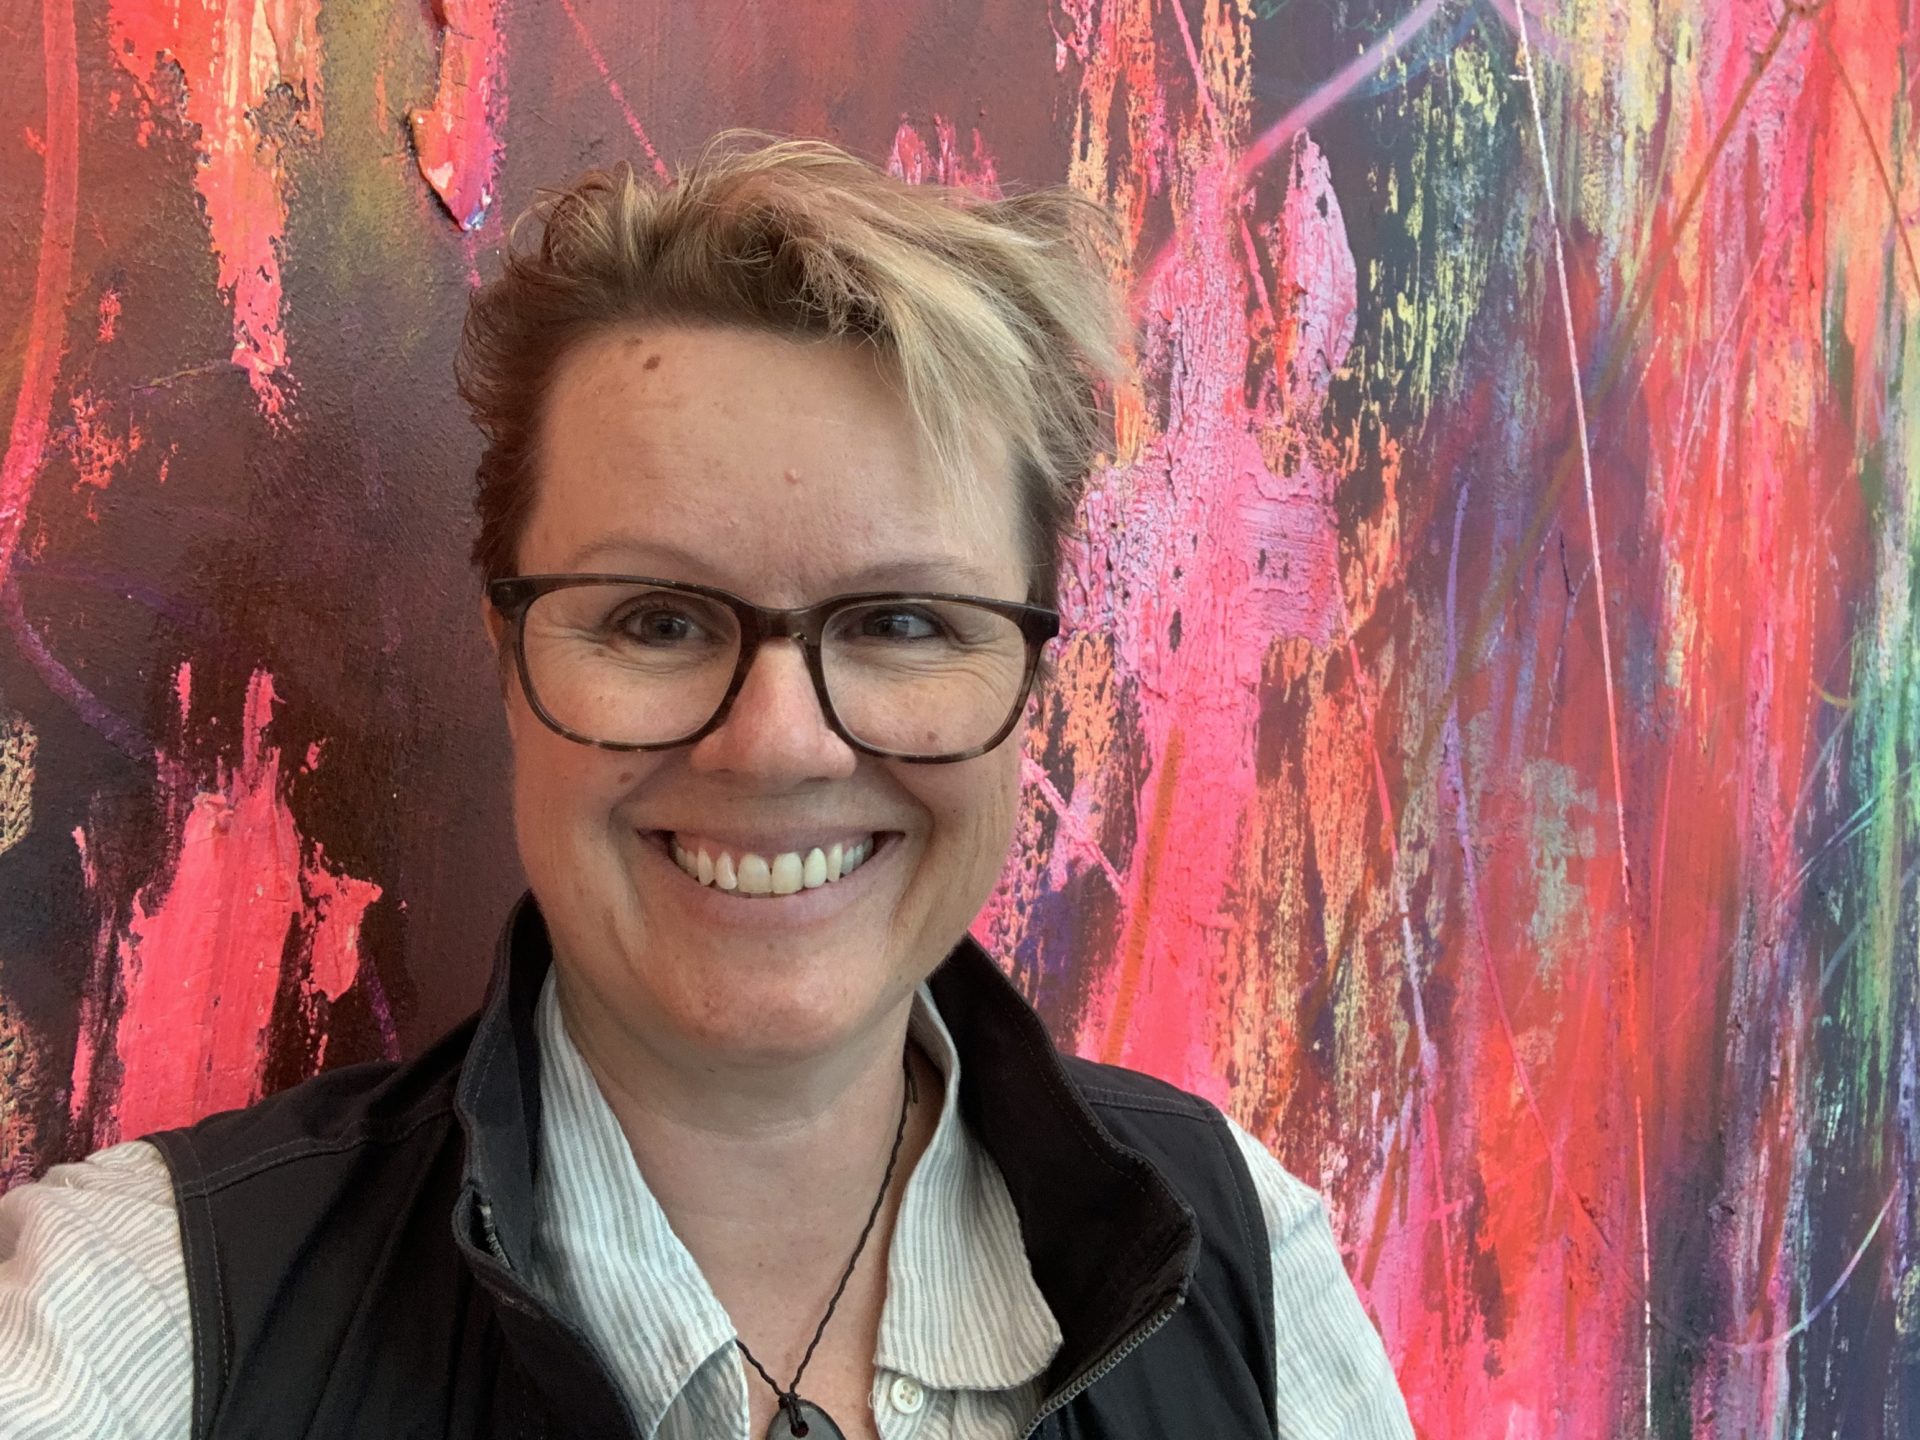 Smiling woman with short blond hair and glasses against a colorful backdrop